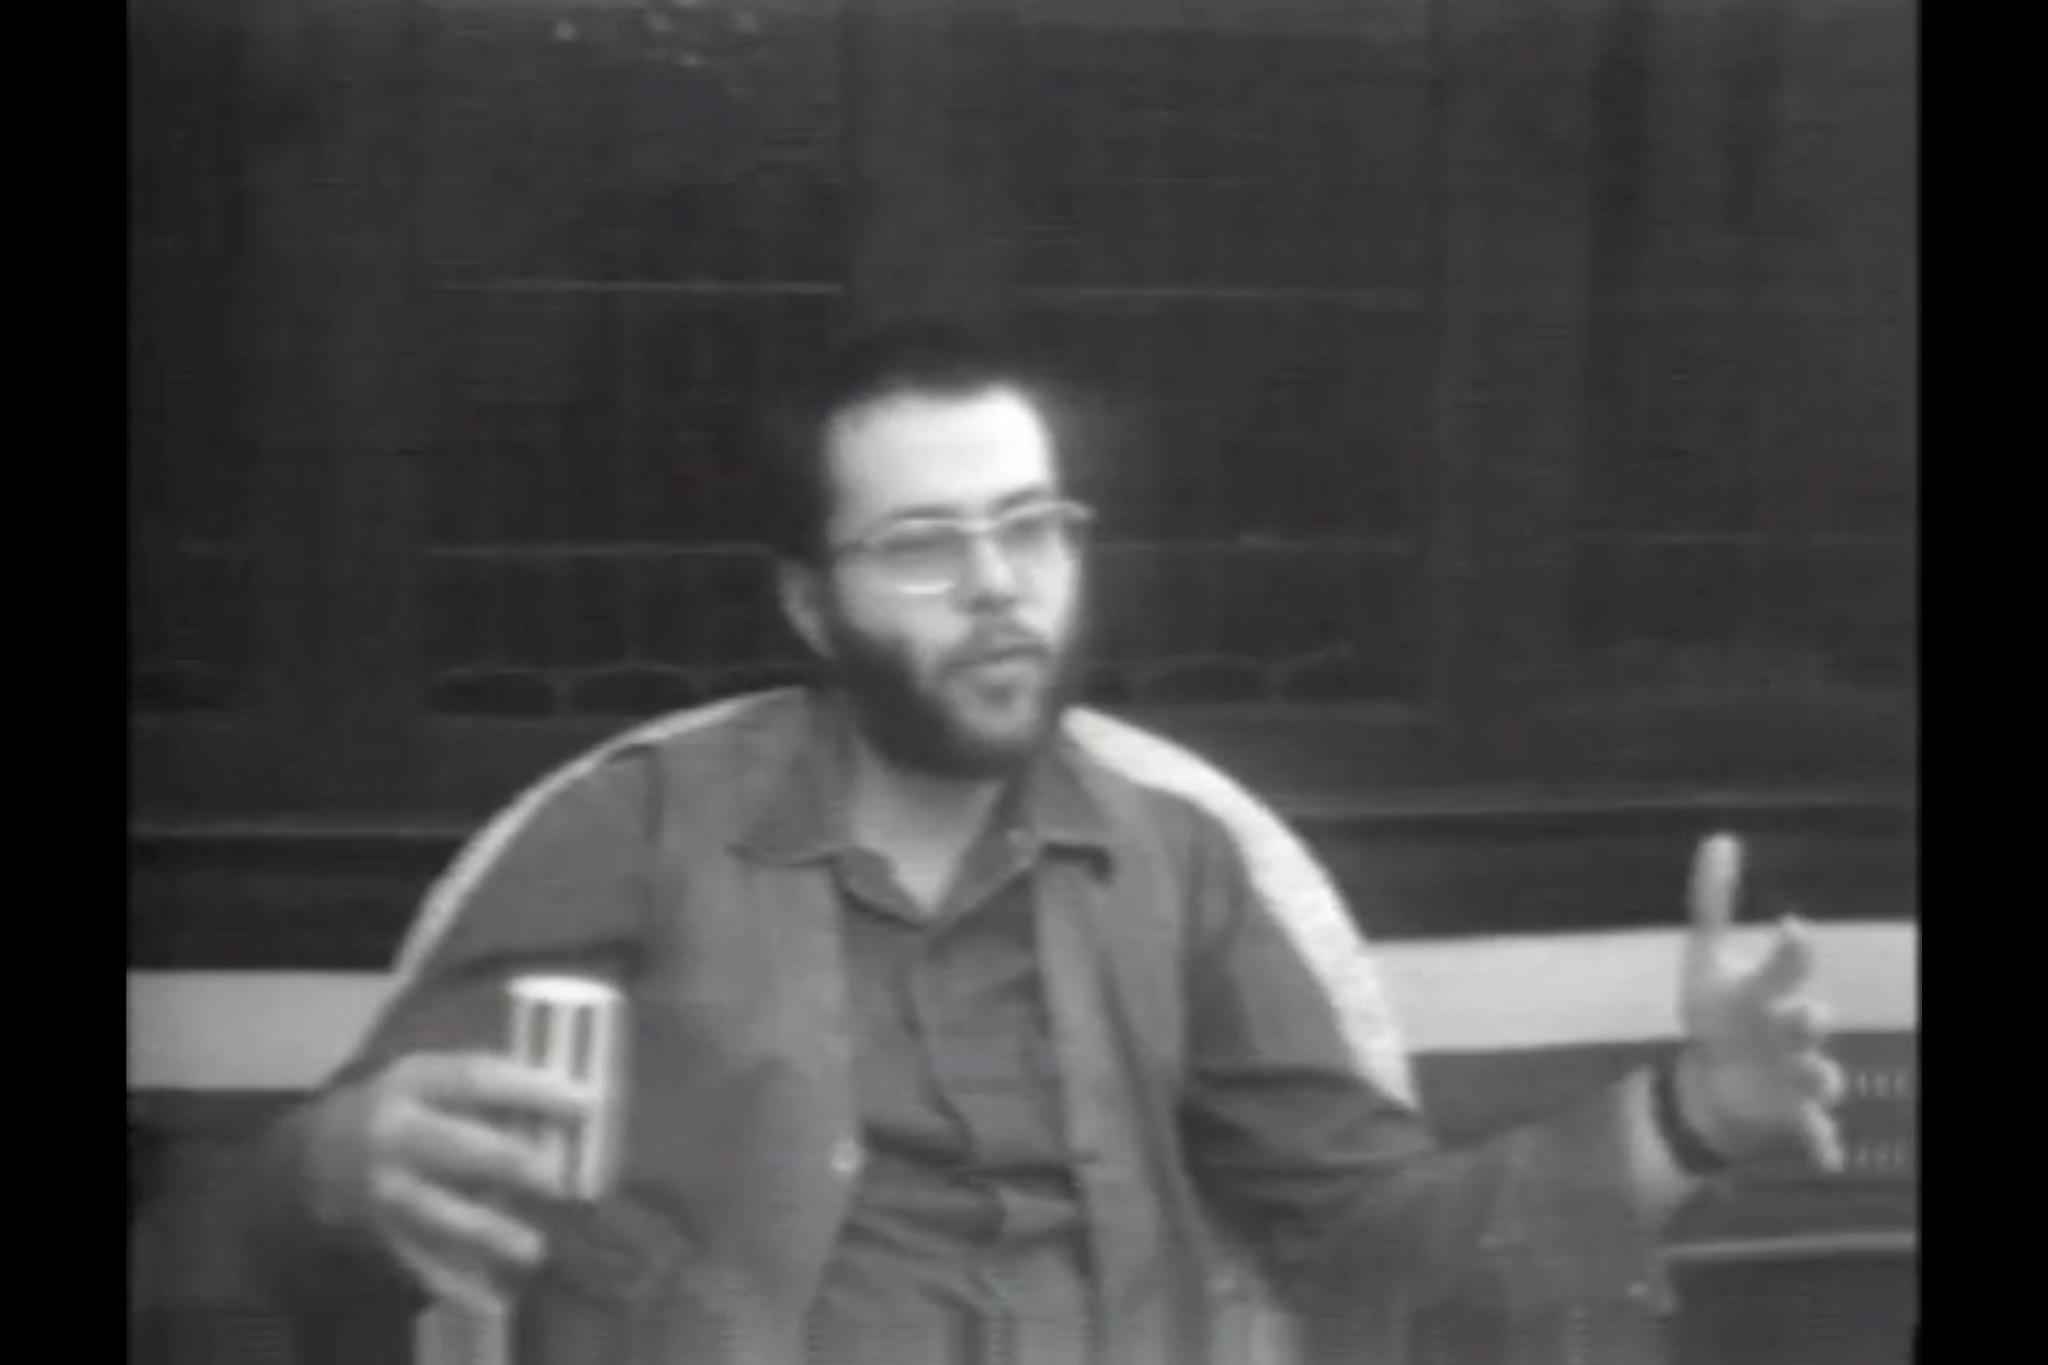 Black and white image of a man with a beard and glasses talking and gesturing.